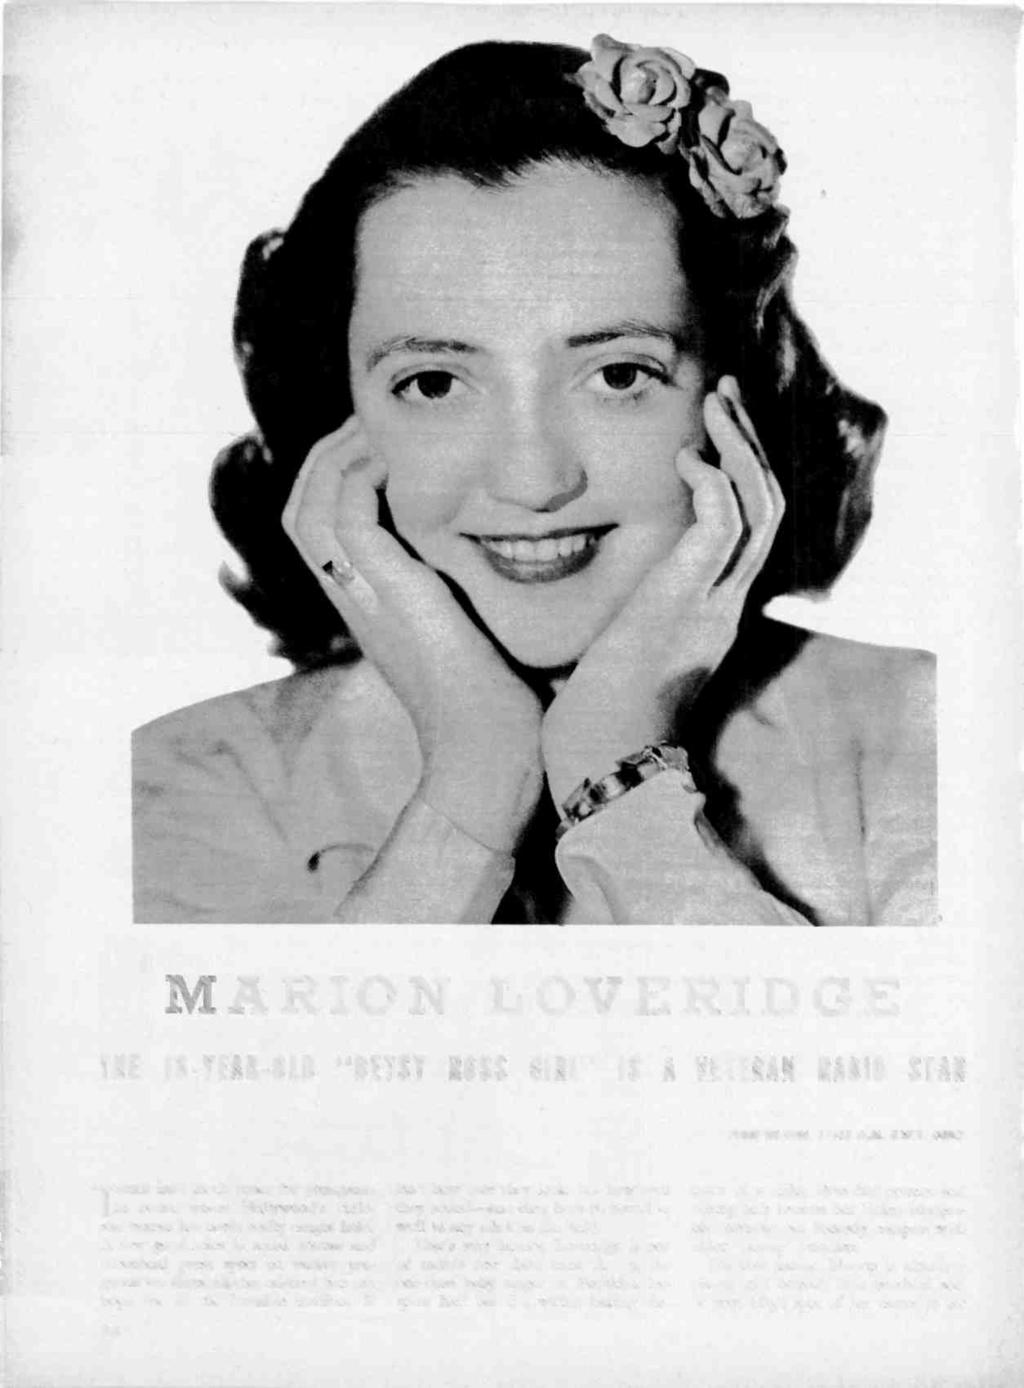 Td 4 ' 20 J MARION LOVERIDGE THE 16 -YEAR -OLD "BETSY ROSS GIRL" IS A VETERAN' RADIO STAR TUNE IN SUN 11:45 AM EWT (NBC/ HERE isn't much oom fo